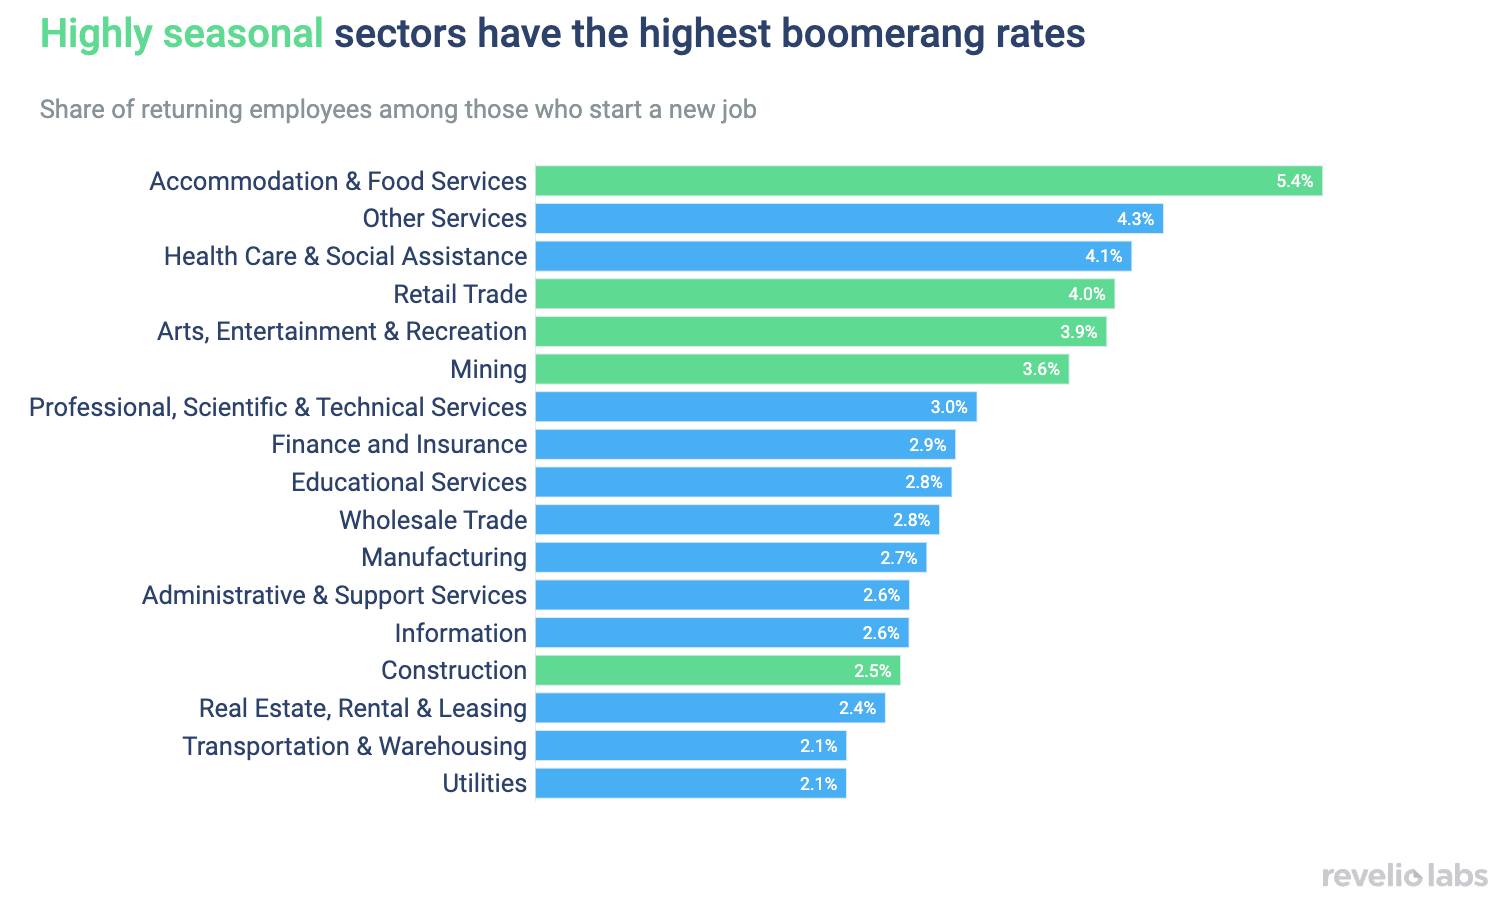 Highly seasonal sectors have the highest boomerang rates